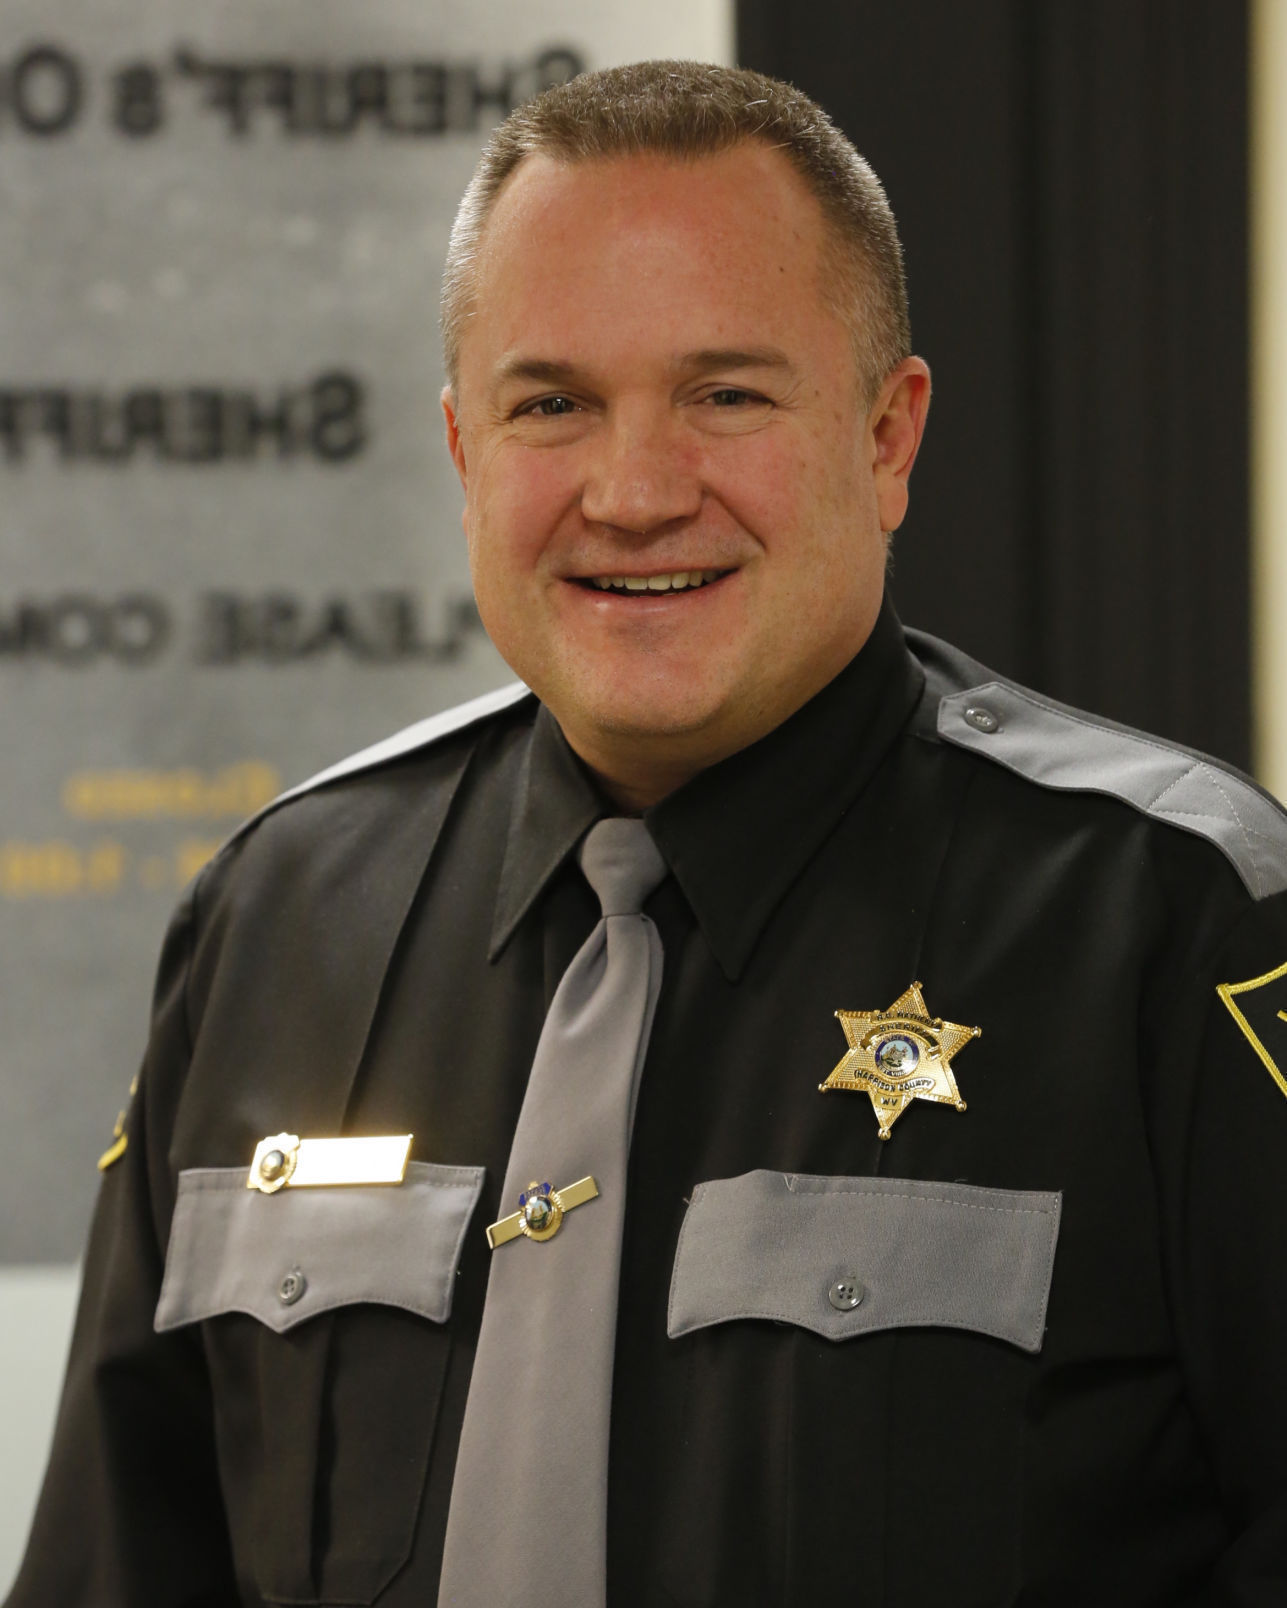 Reserve deputy sheriff program up and running in Harrison County | News